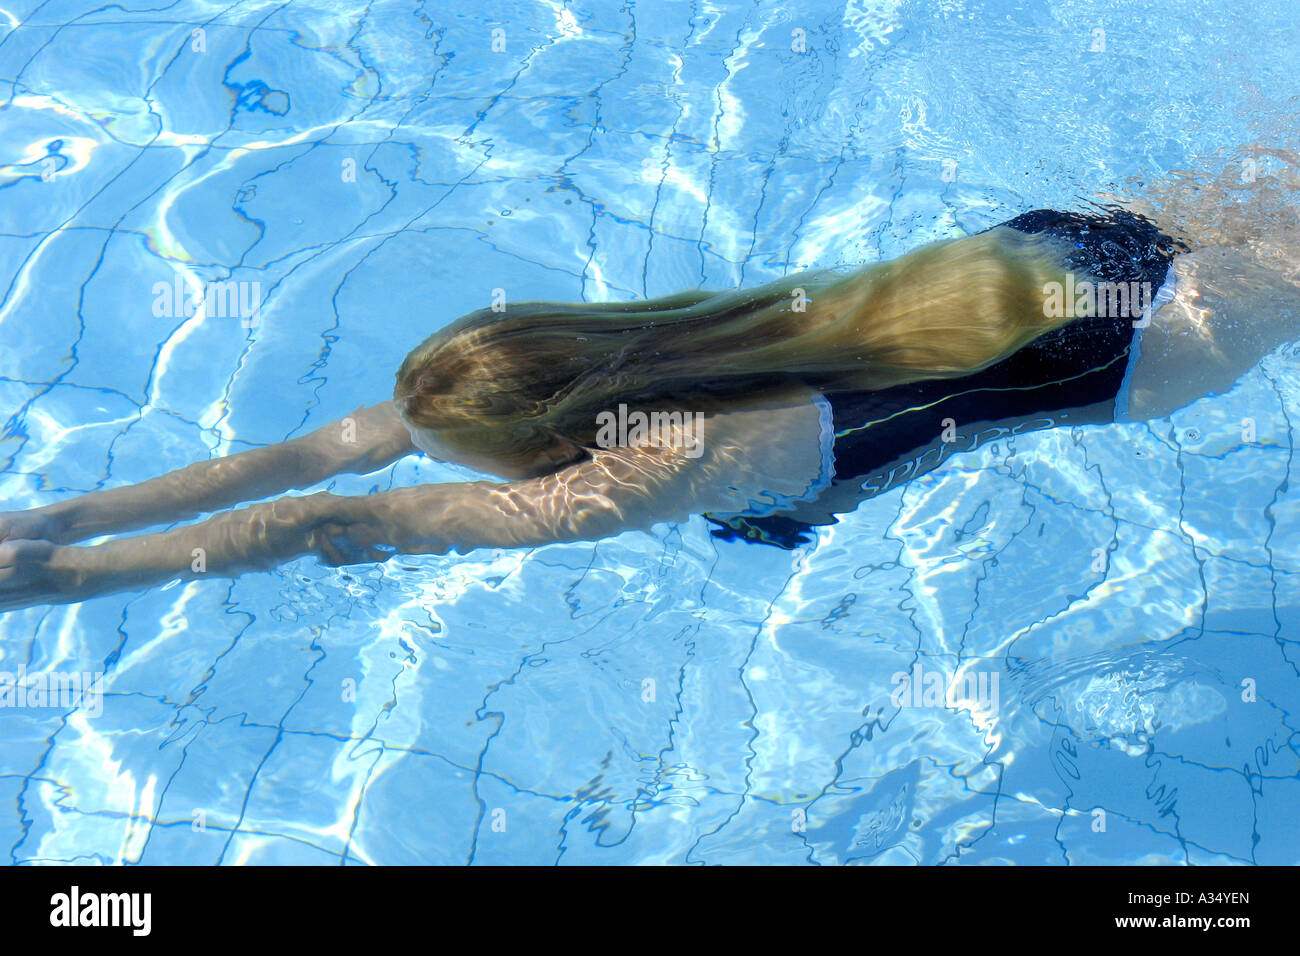 Young Woman Plunge Into The Pool At Home Stock Photo, Picture and Royalty  Free Image. Image 129574000.